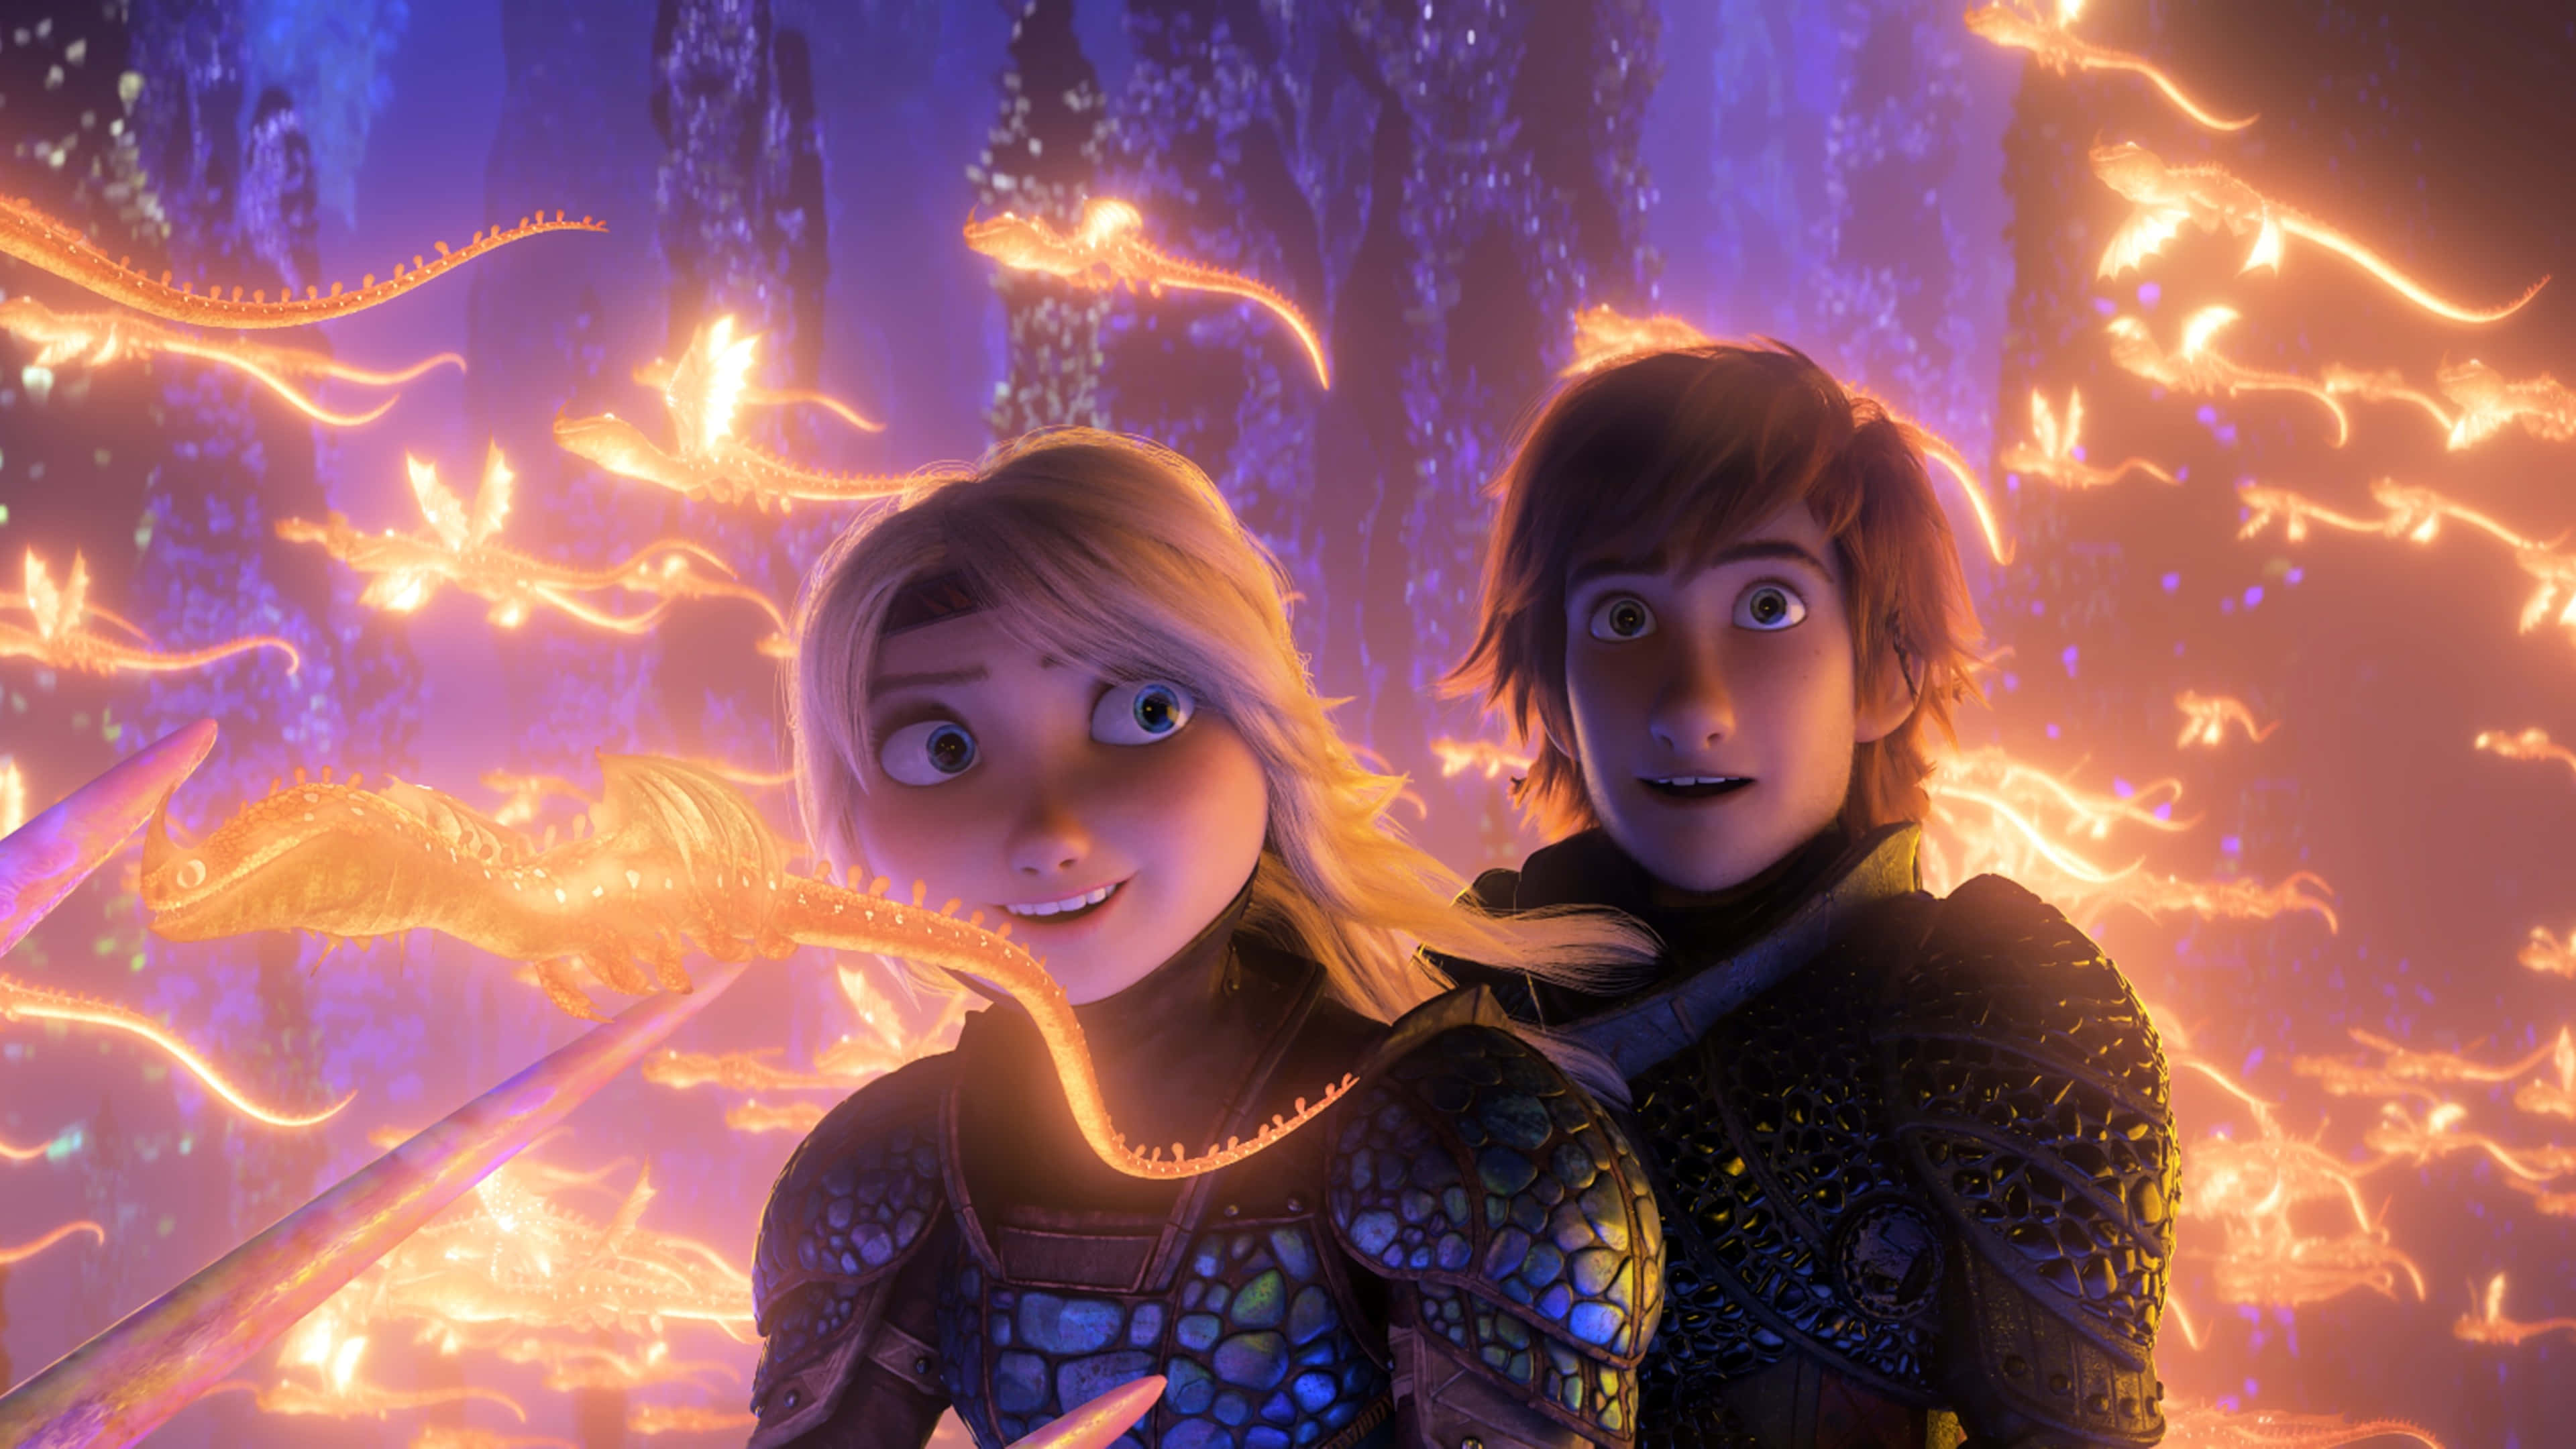 Leavventure Di Hiccup E Toothless In How To Train Your Dragon In 4k Sfondo